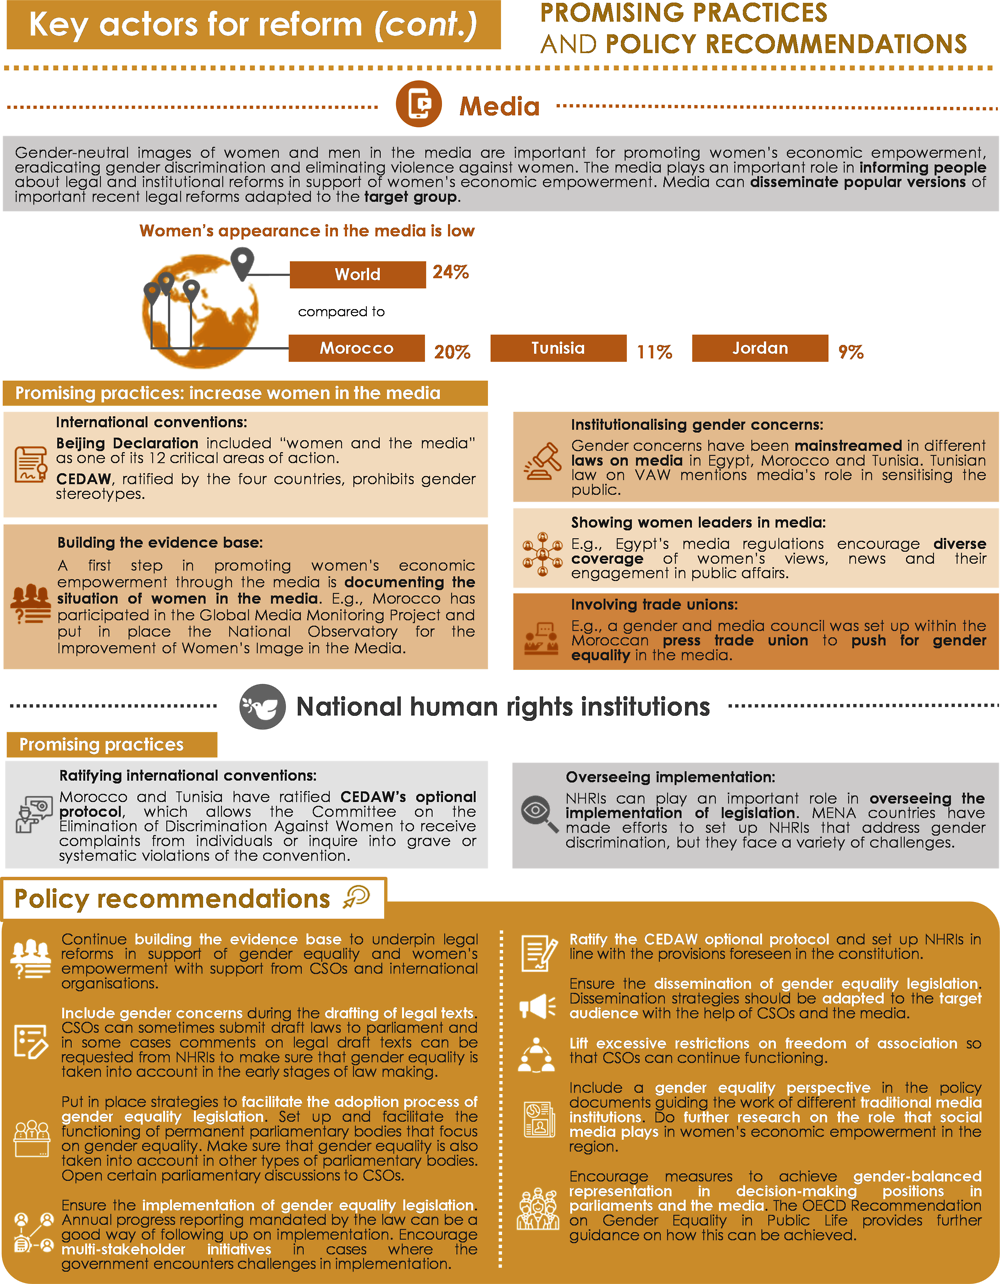 Infographic 5.1. Key actors for reform